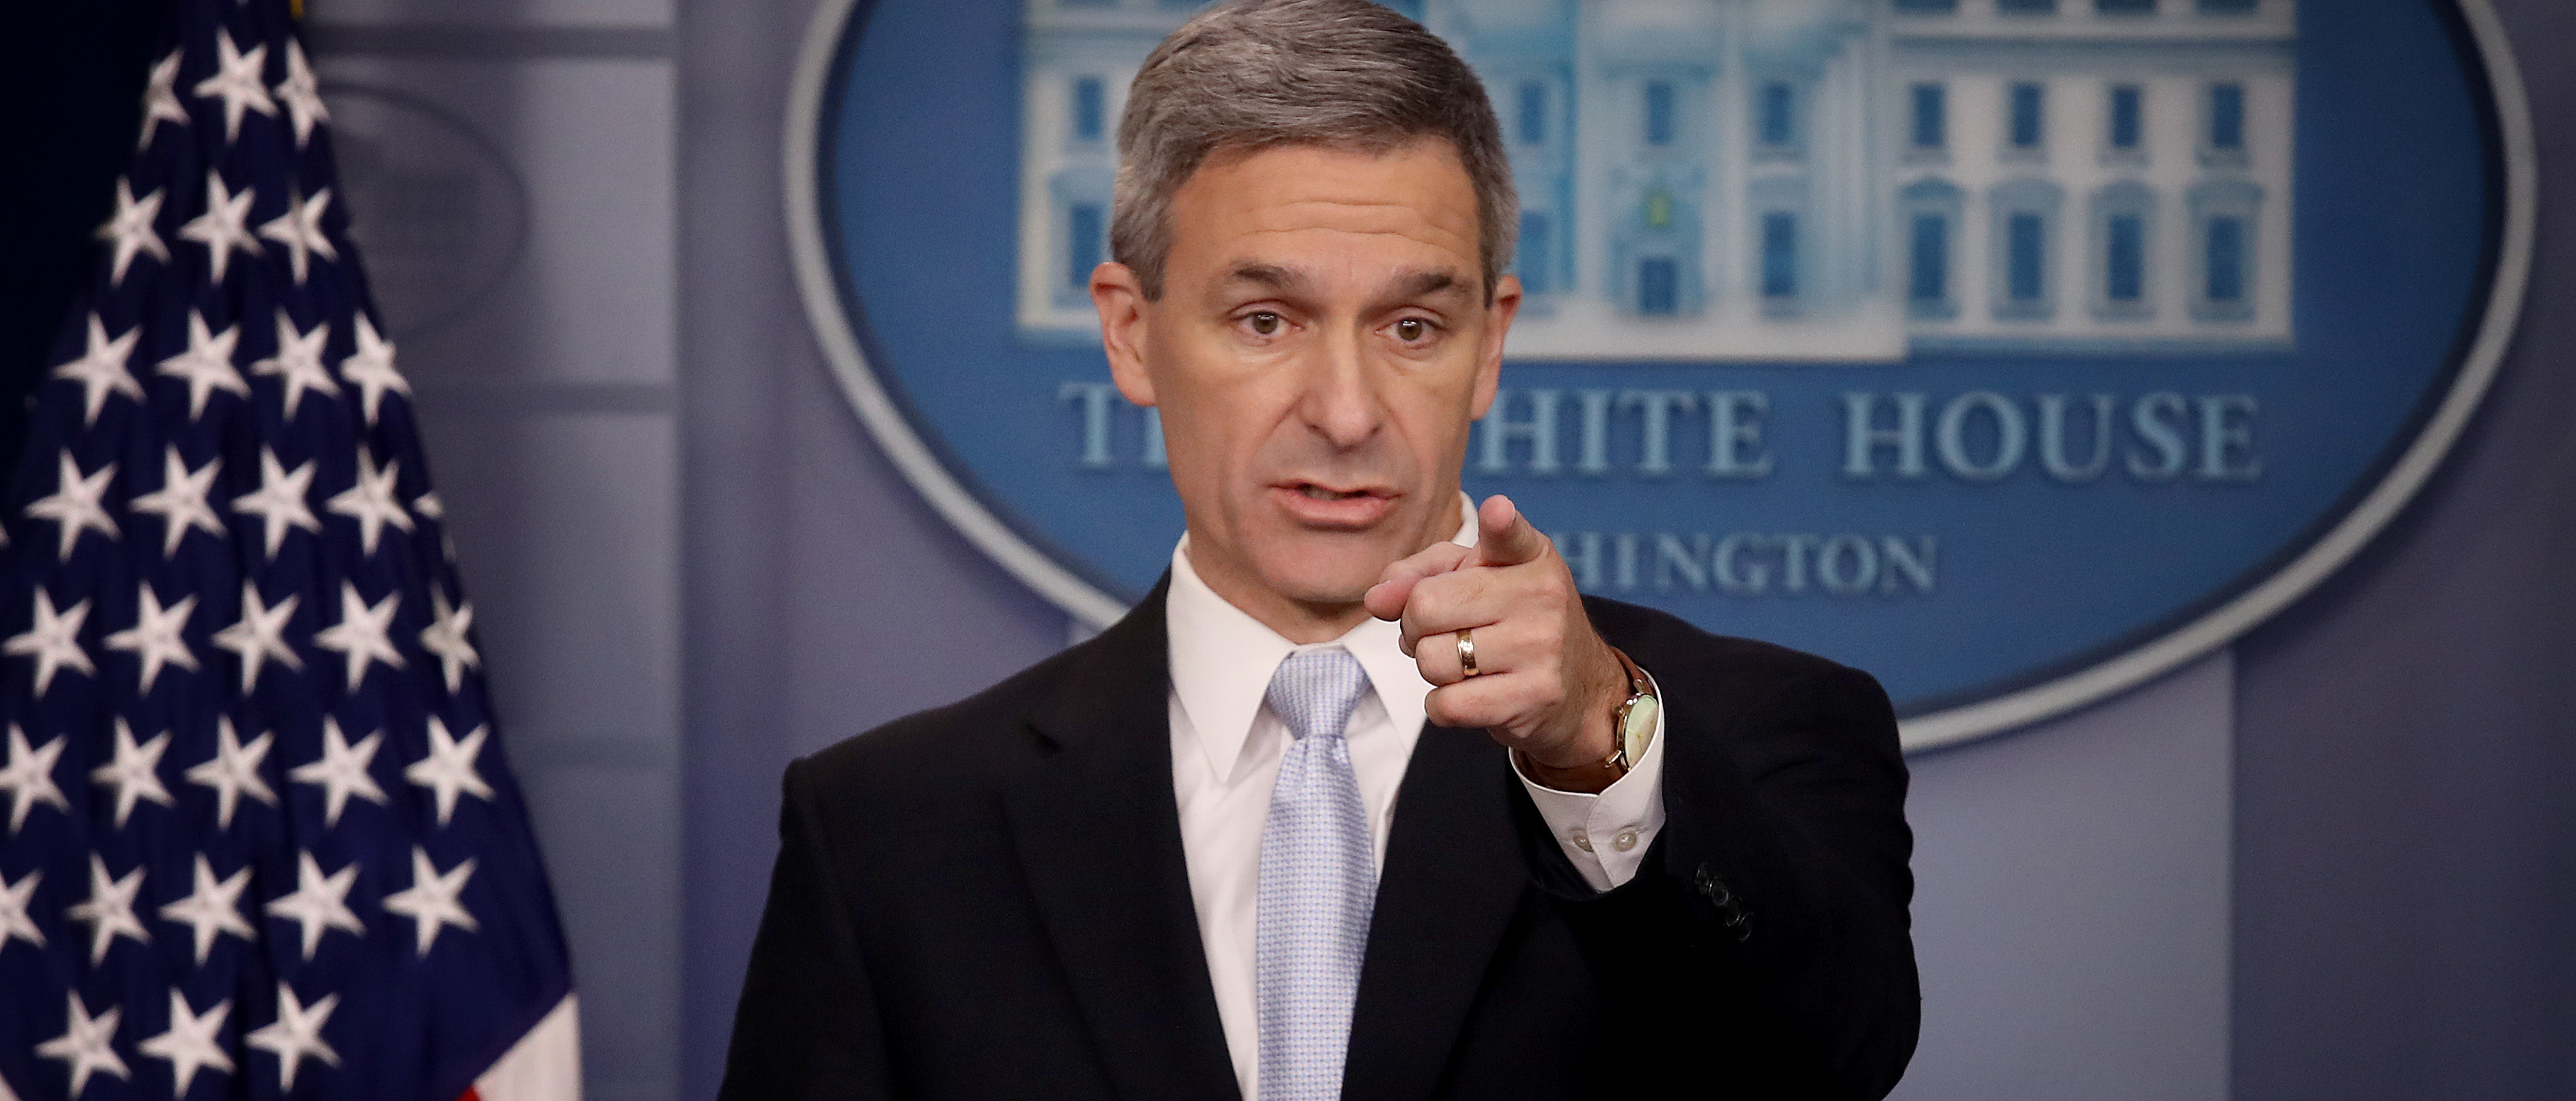 Acting Director of U.S. Citizenship and Immigration Services Ken Cuccinelli speaks about immigration policy at the White House during a briefing Aug. 12, 2019 in Washington, D.C. (Photo by Win McNamee/Getty Images)